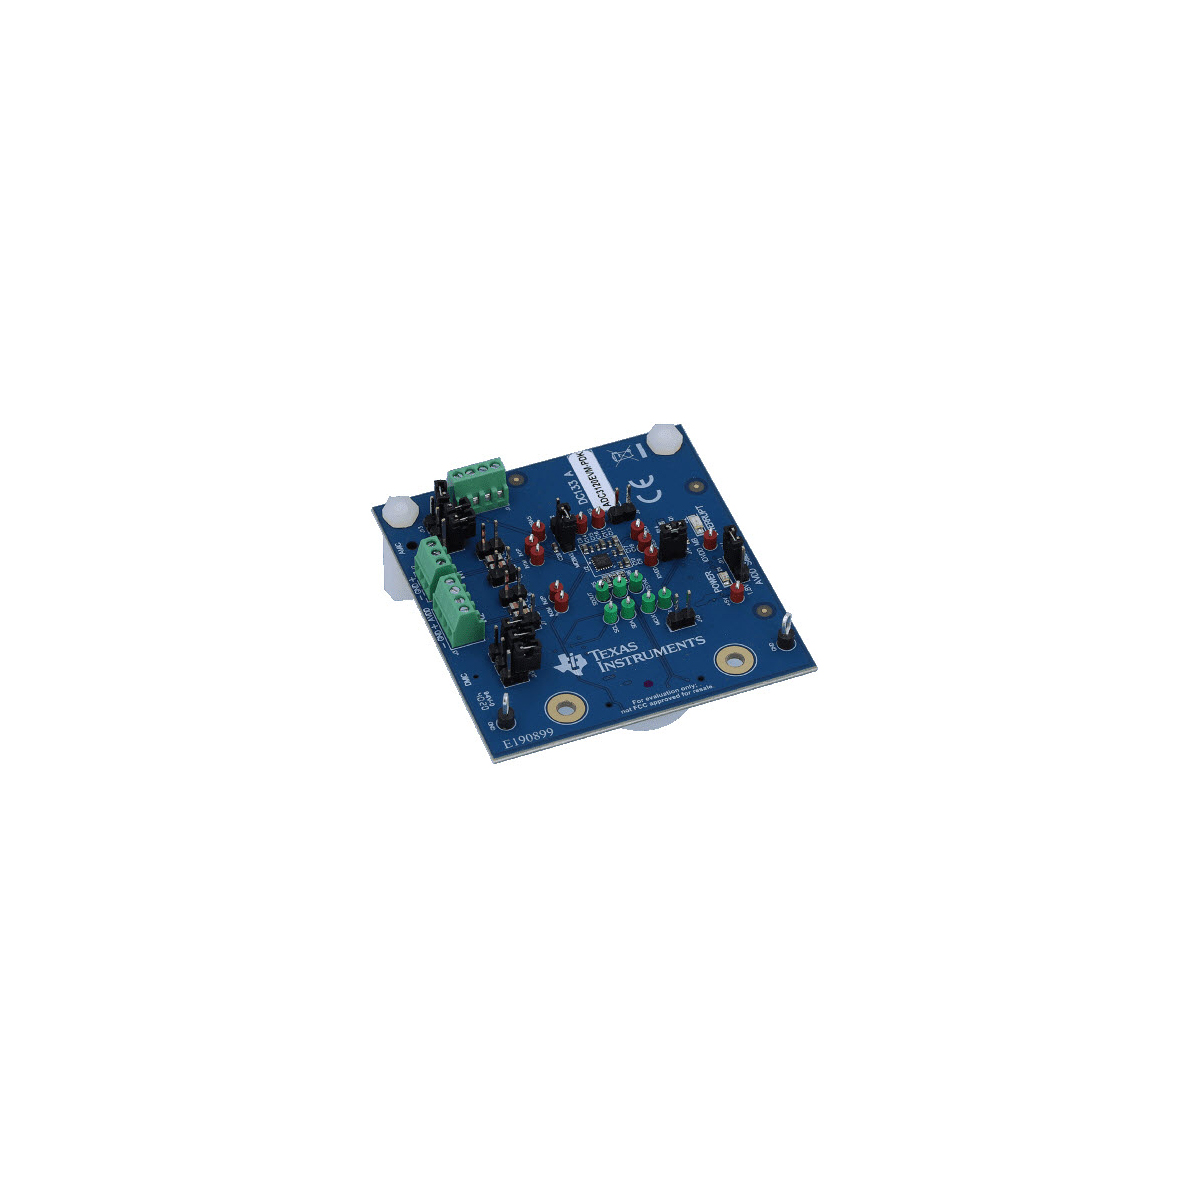 The model is ADC3120EVM-PDK